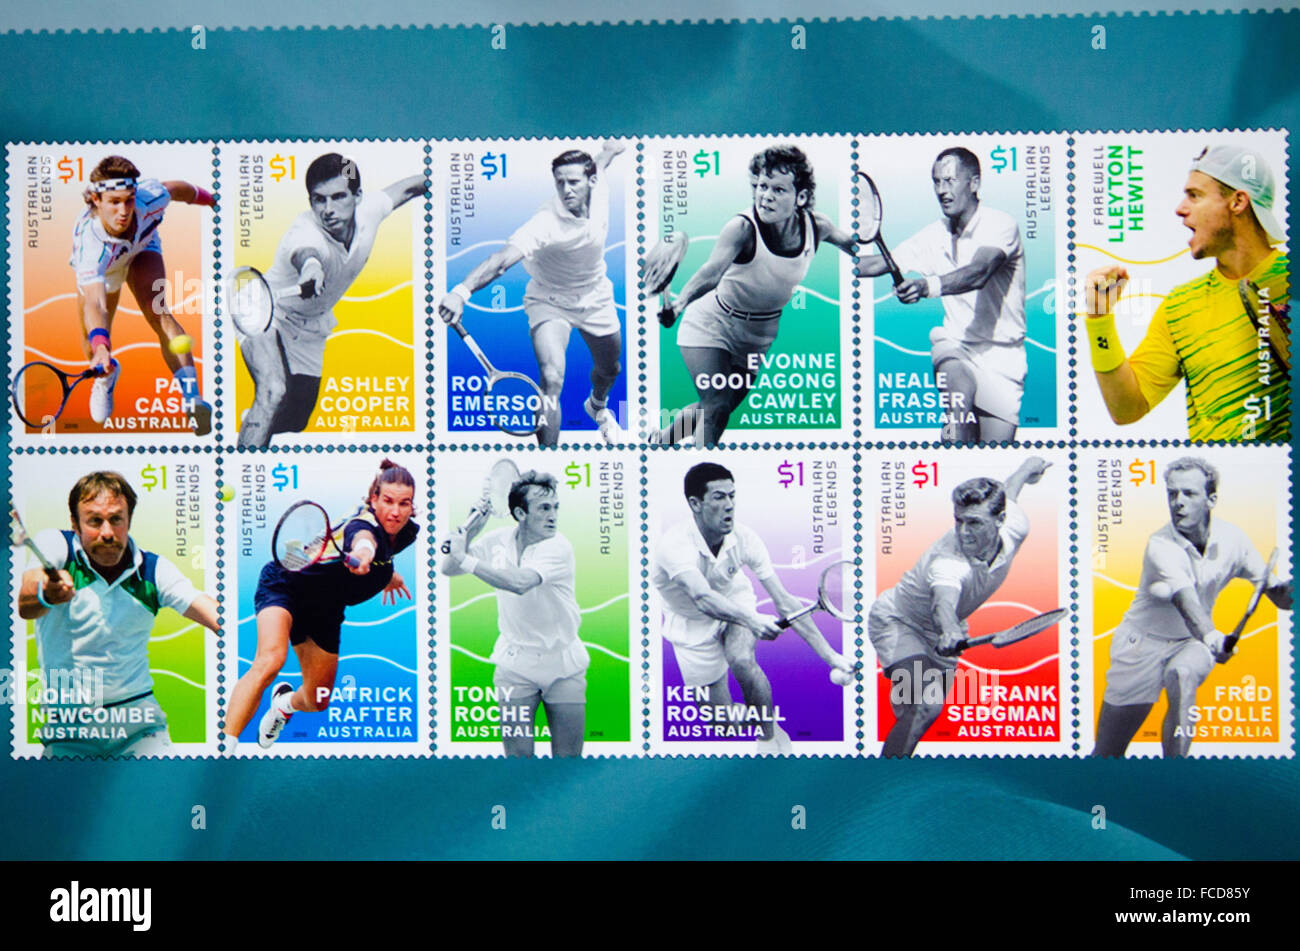 Sydney, Australia. 22nd January, 2016. Australia Post honours tennis legends  with a new range of stamps featuring famous players of the sport. The  recently avaliable stamps were highlighted at the 32nd Australia